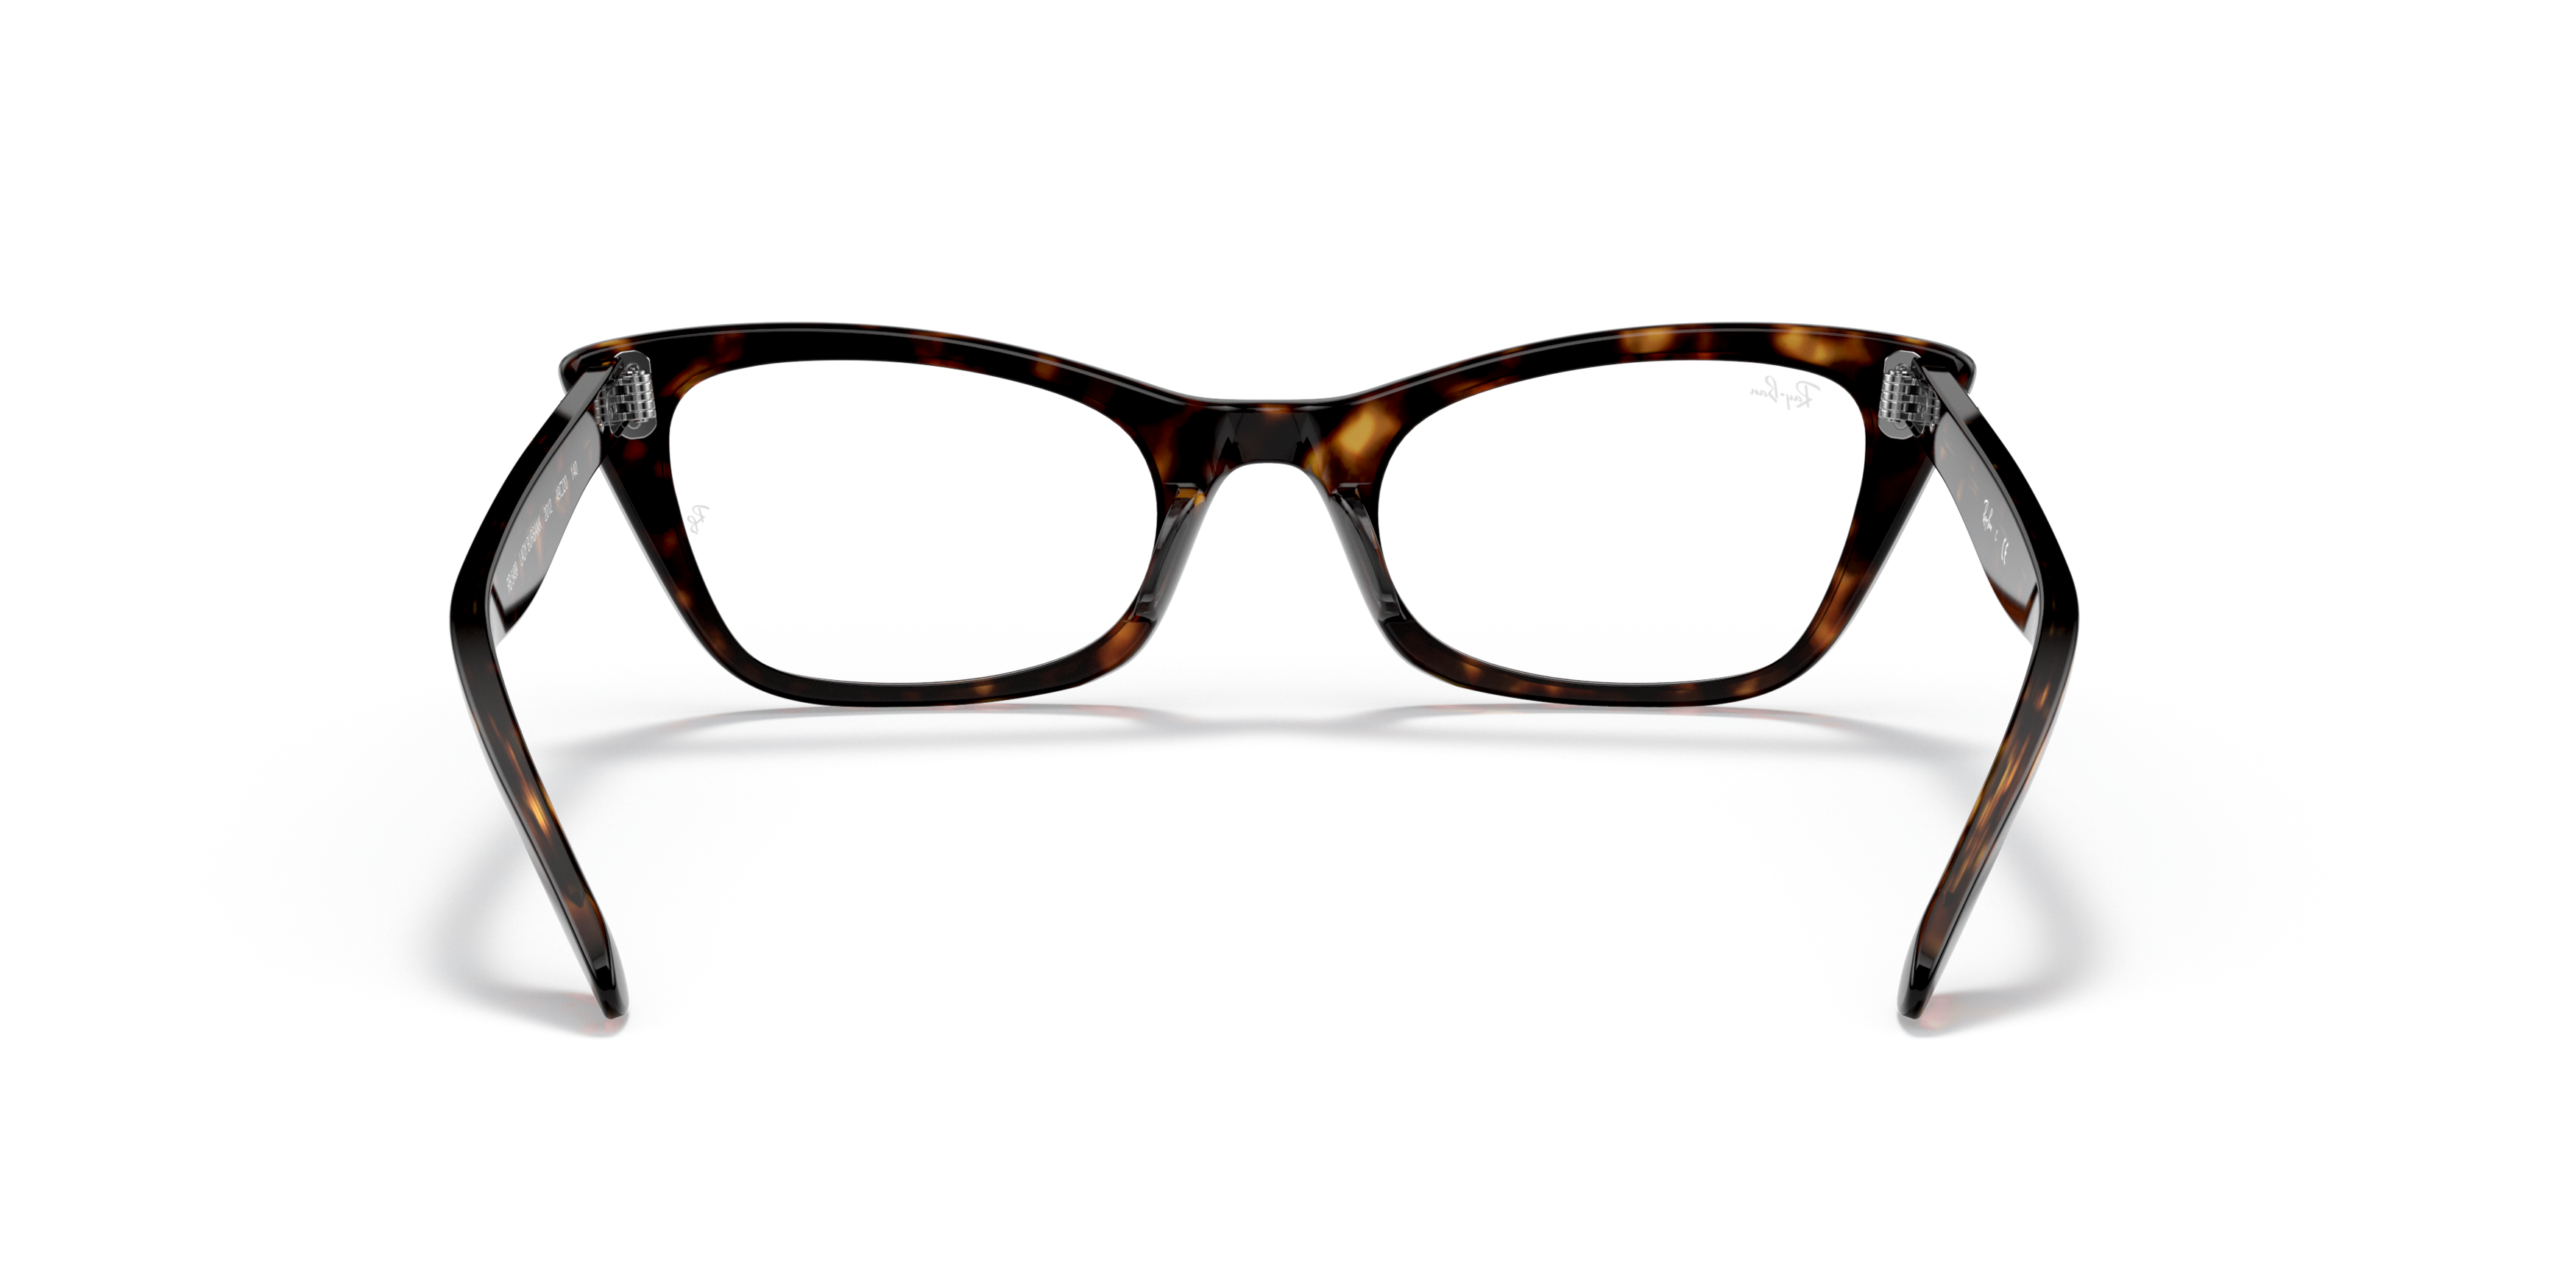 Detail02 Ray-Ban Lady RX 5499 (2012) Glasses Transparent / Tortoise Shell